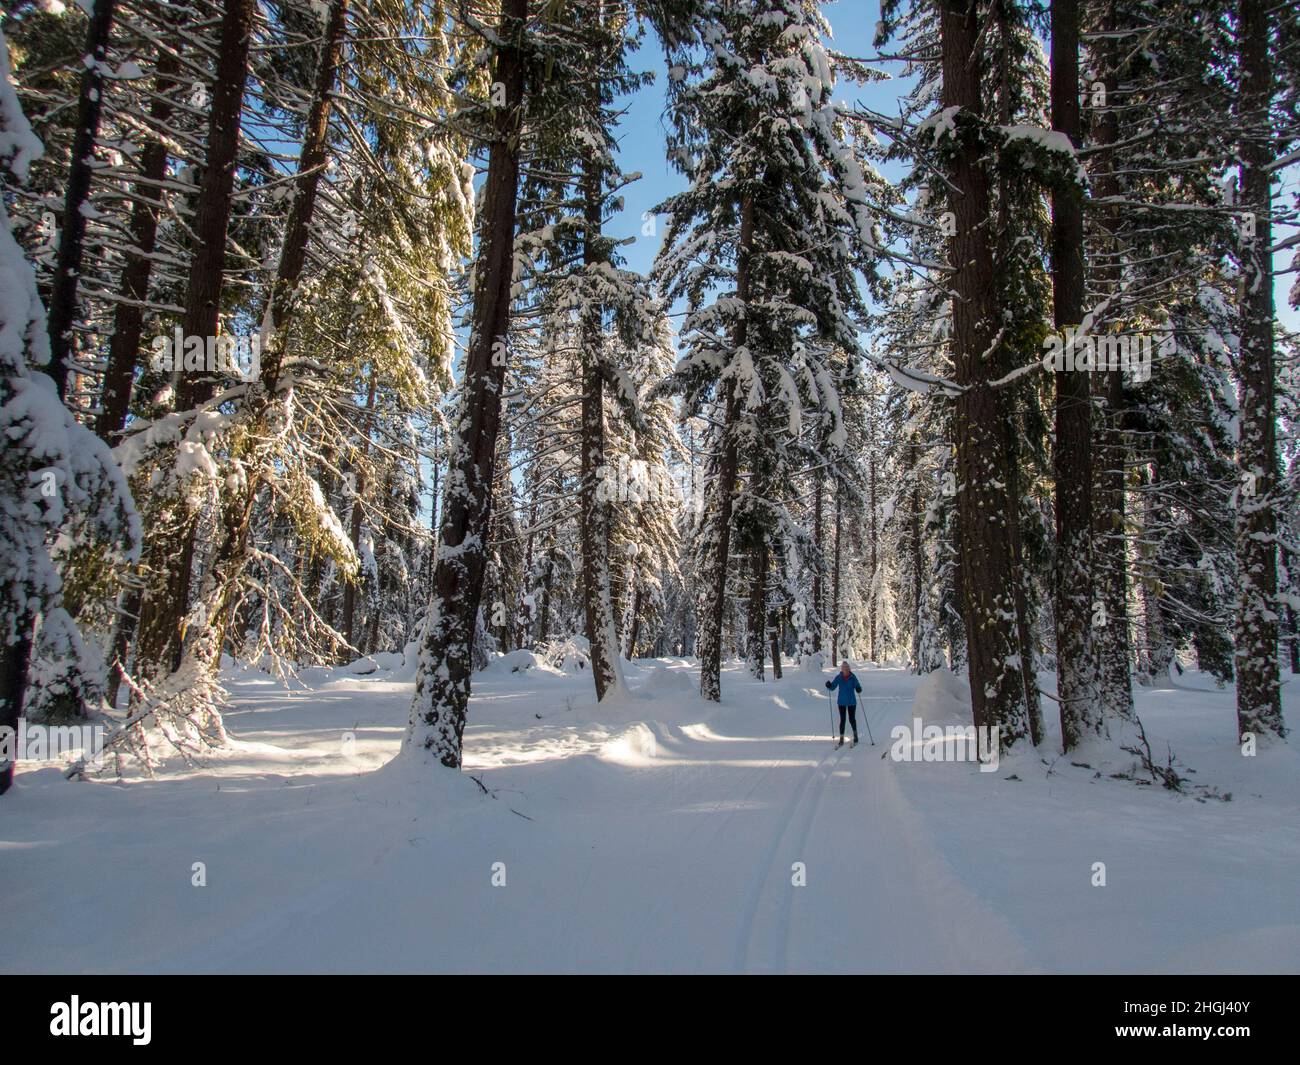 A winter scene with a woman cross-country skiing (model released) through the snow-covered forest at Lake Wenatchee State Park in eastern Washington S Stock Photo